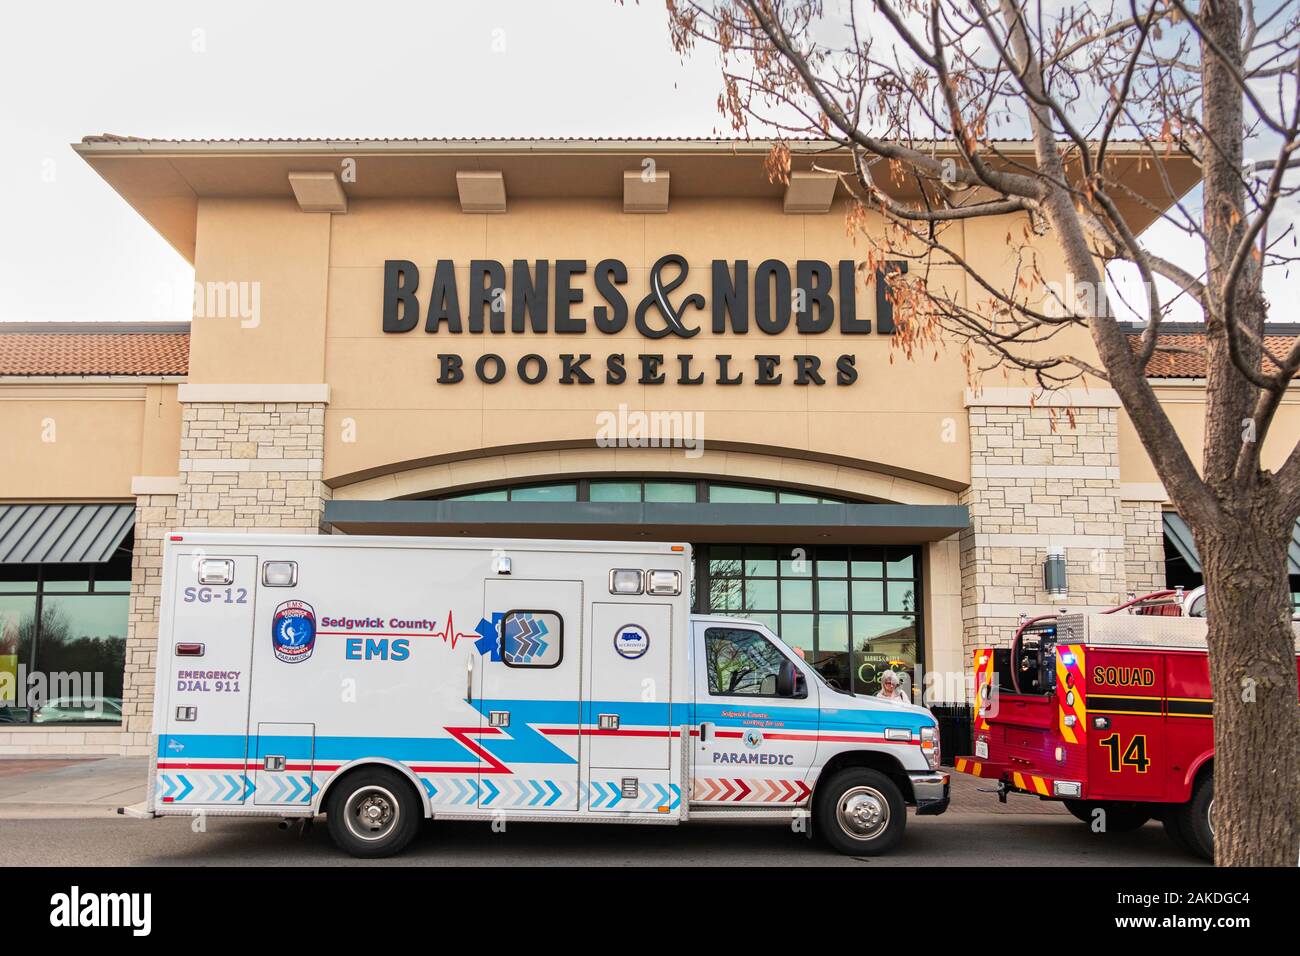 EMS ambulance on call while parked in front of Barnes & Noble booksellers storefront in Bradley Fair shopping center, Wichita, Kansas, USA. Stock Photo